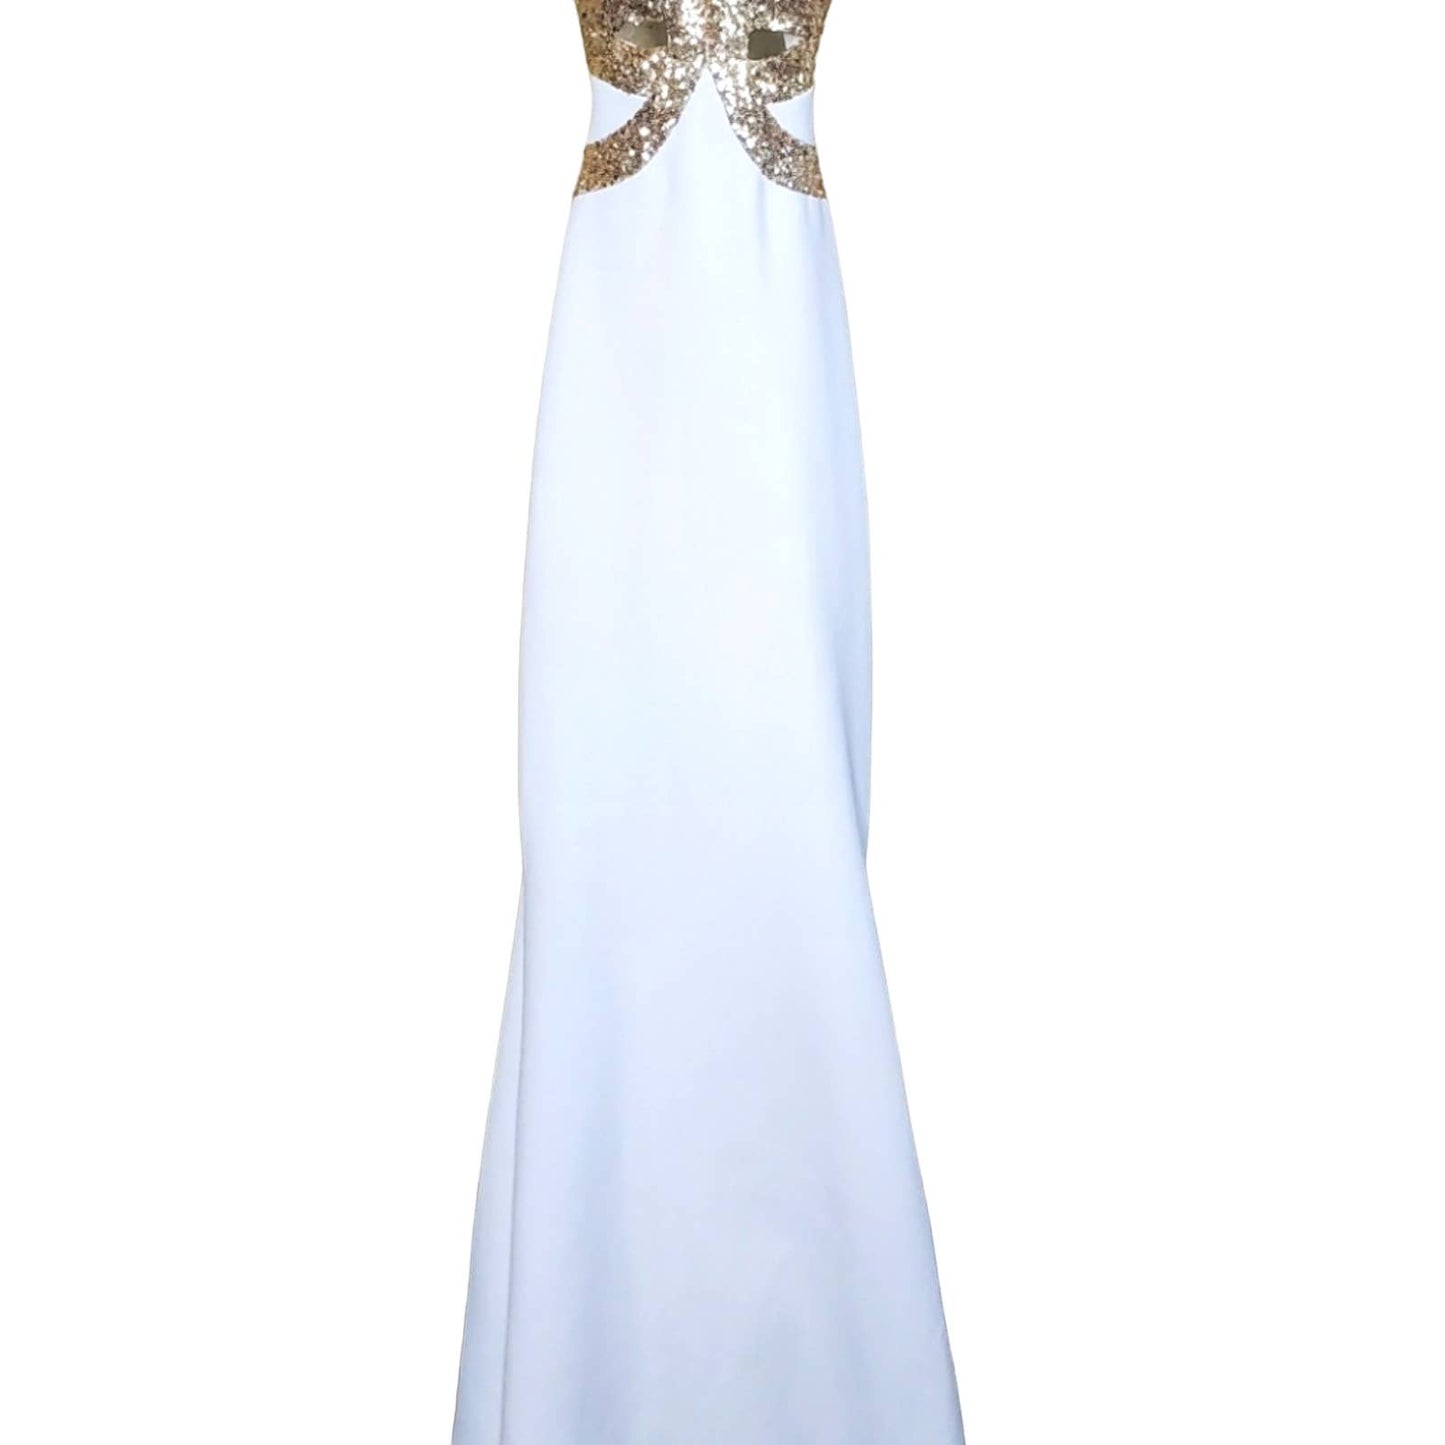 FAVIANA White Cutout Dress with Gold Sequin Detail, Size 0